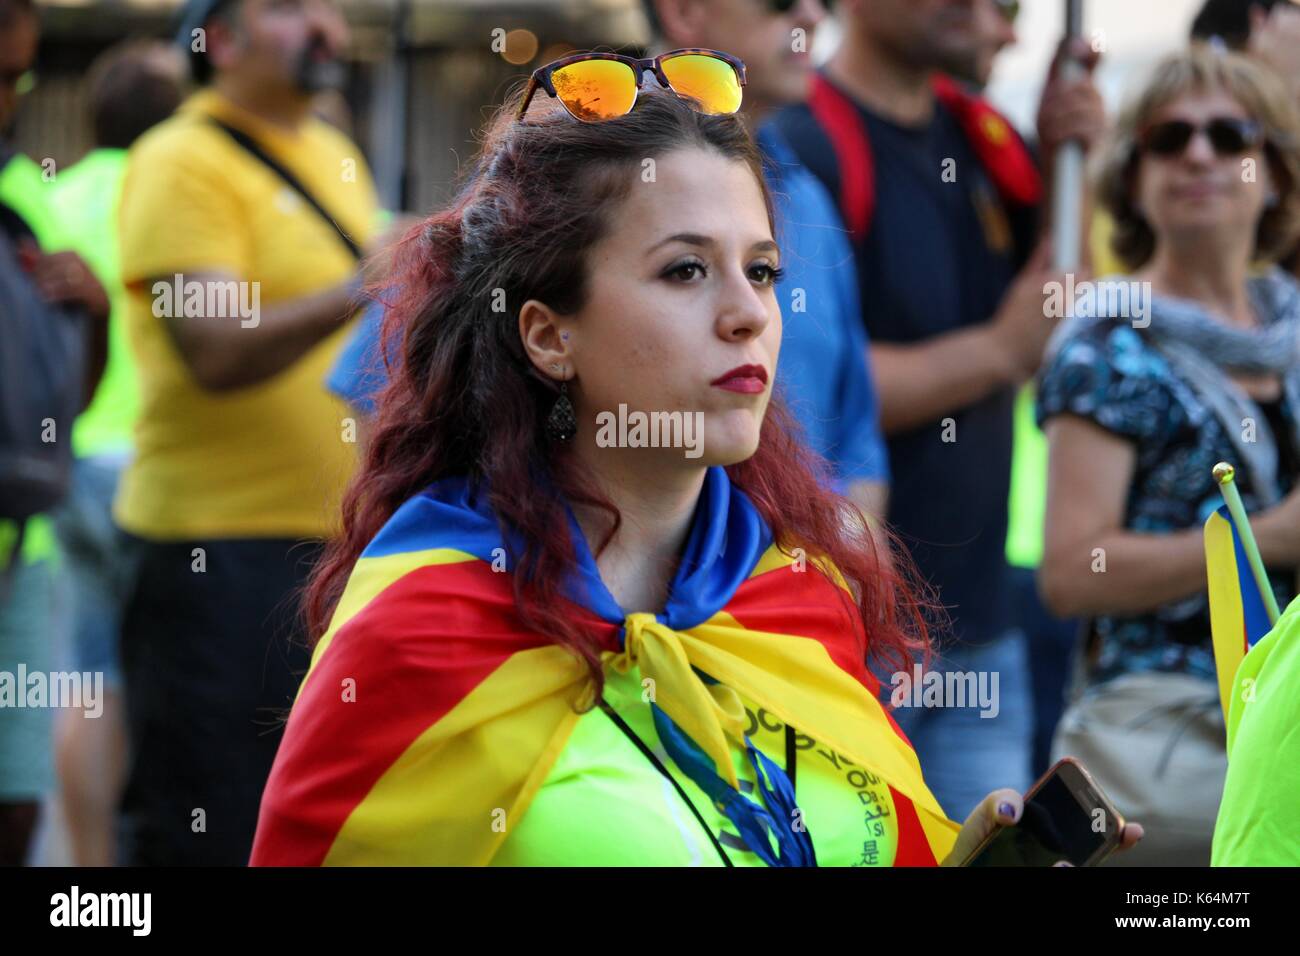 Barcelona, Spain. 11th Sep, 2017. People participating with Catalan independentist symbols at the Diada, the national day of Catalonia. Spain`s autonomous region aims to celebrate an independence referendum on October 1st. Credit: Dino Geromella/Alamy Live News Stock Photo